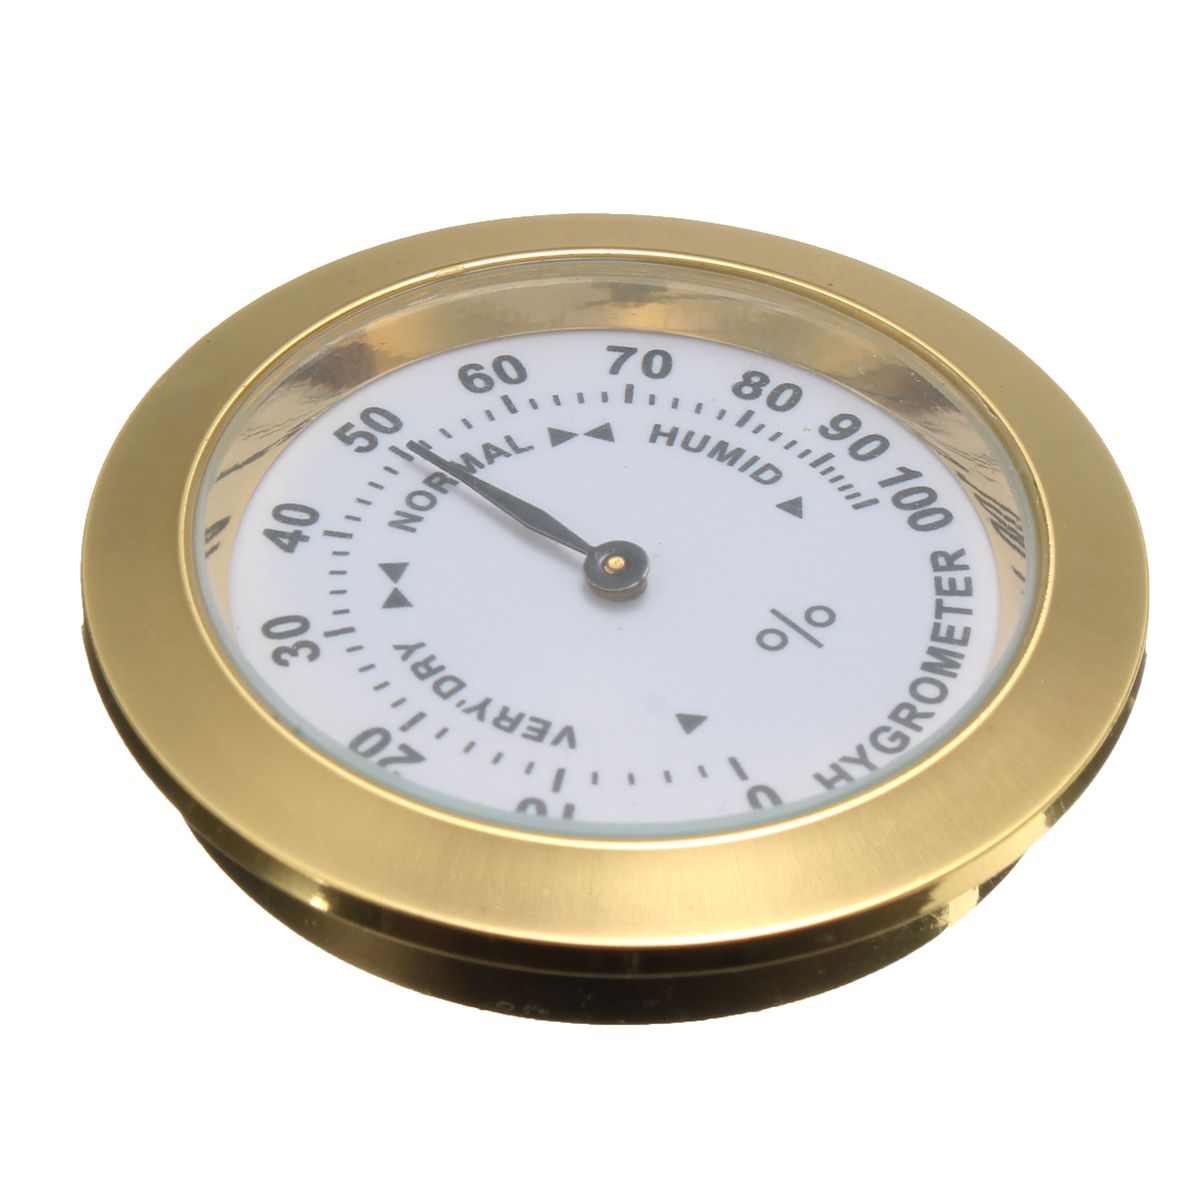 Analog-Hygrometer-Cigar-Humidity-Calibration-Gauge-With-Glass-Lens-for-Humidors-1368440